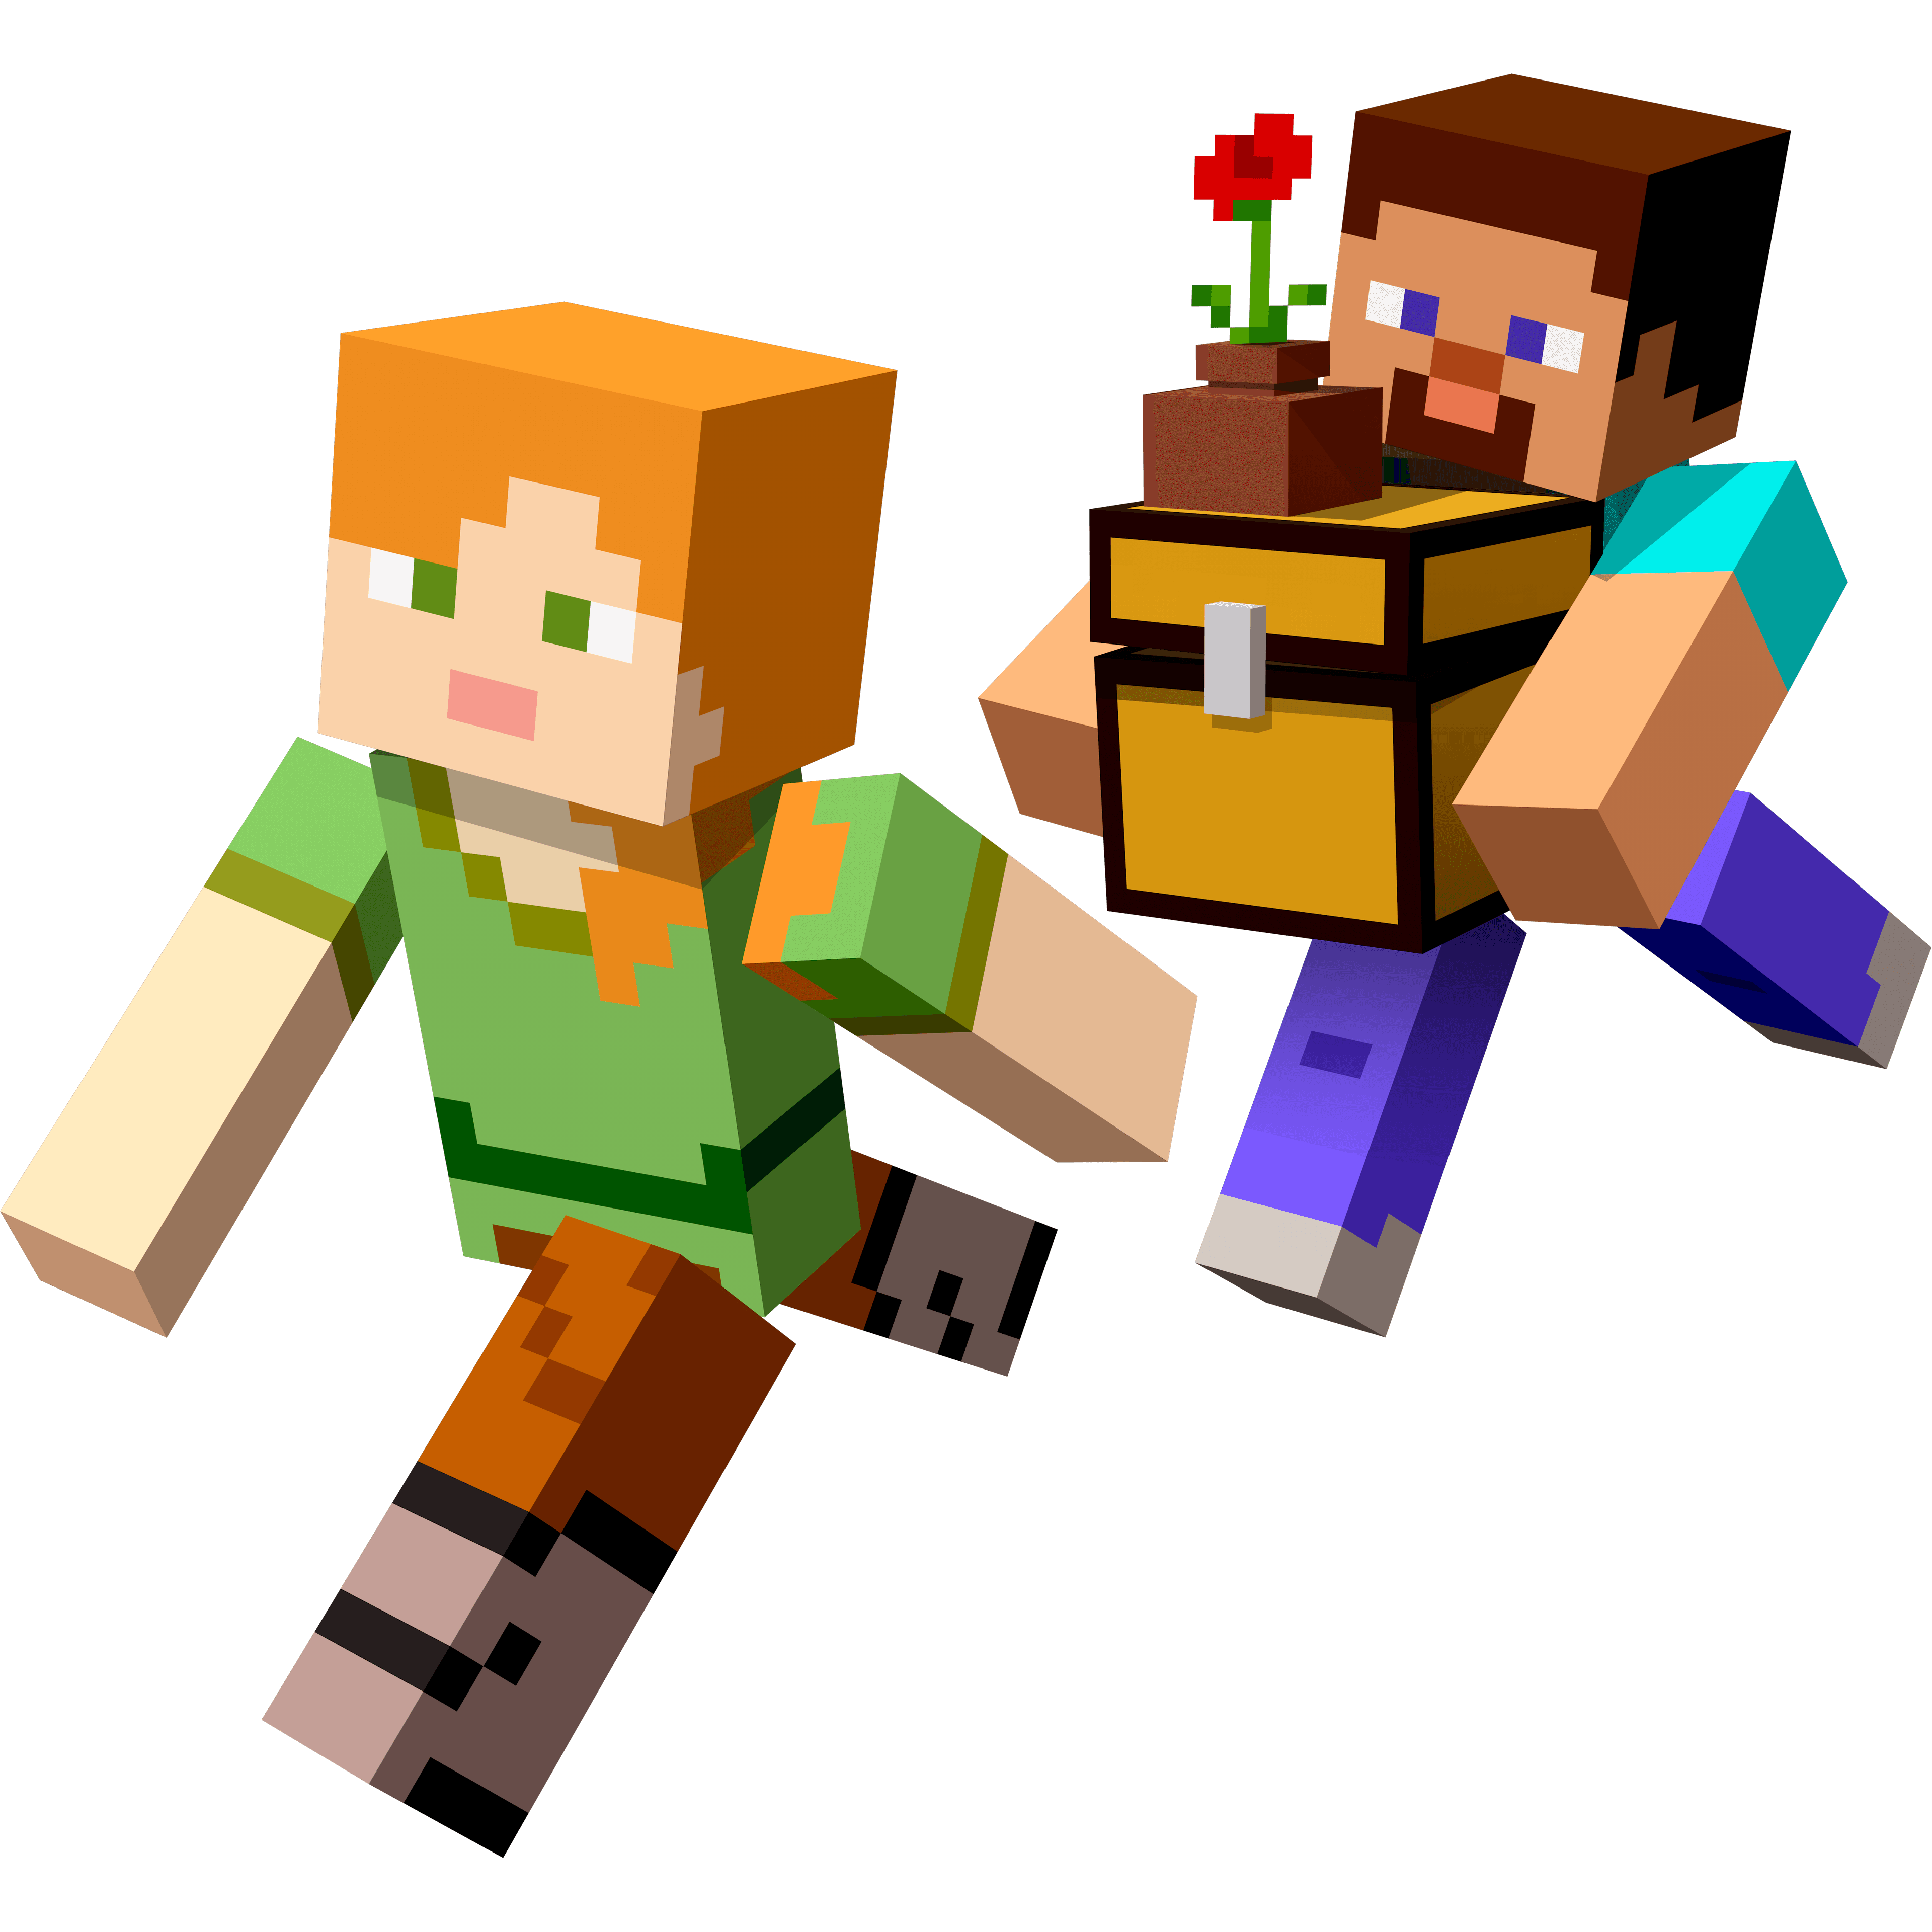 An illustration of two Minecraft characters Alex and Steve with default textures running, with one holding an opened chest with a flower pot on top of it.